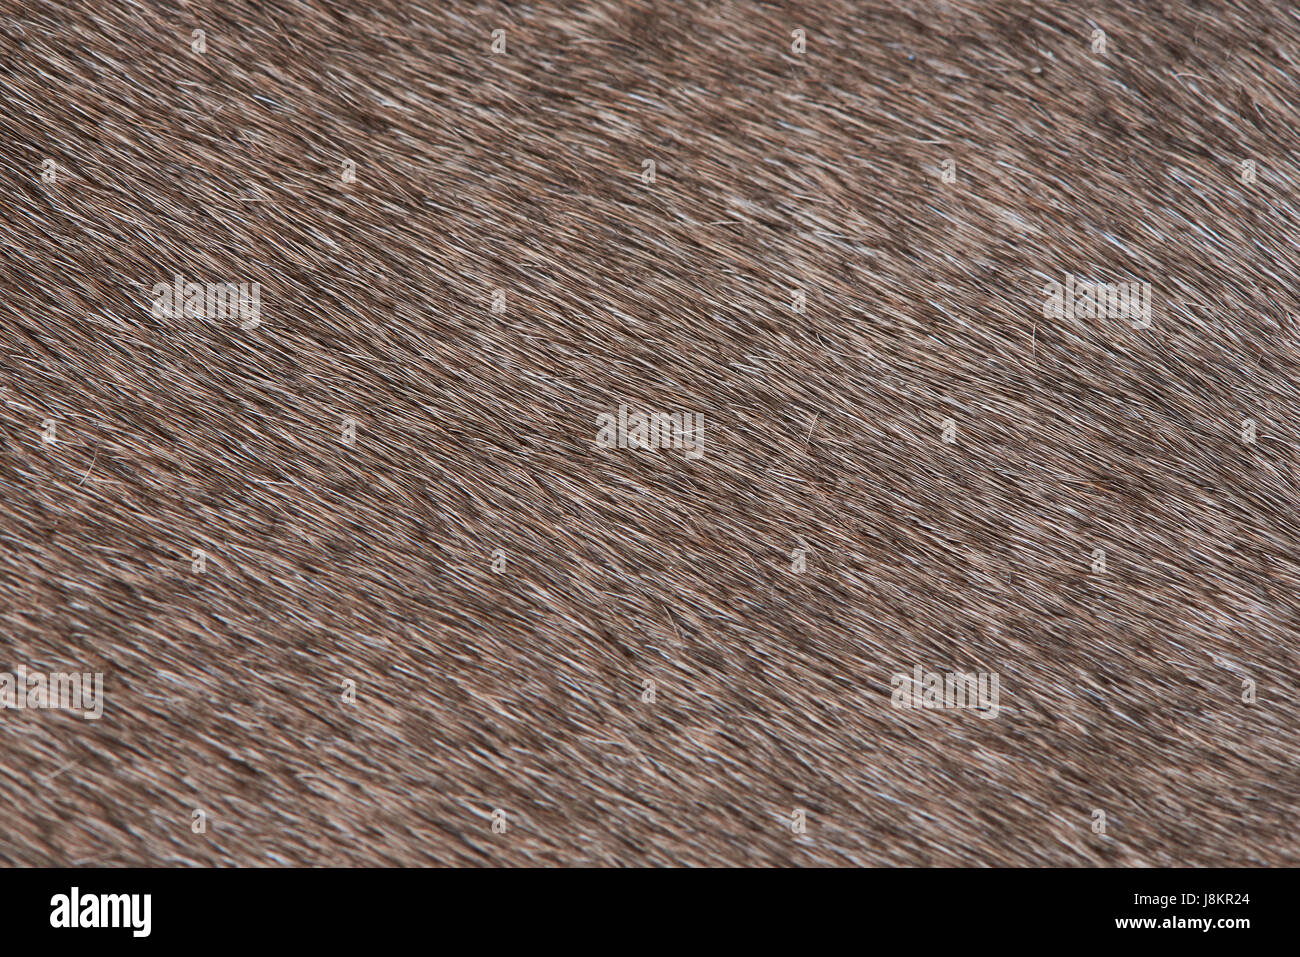 Domestic animal brown fur close-up pattern. Texture of animal hair Stock Photo